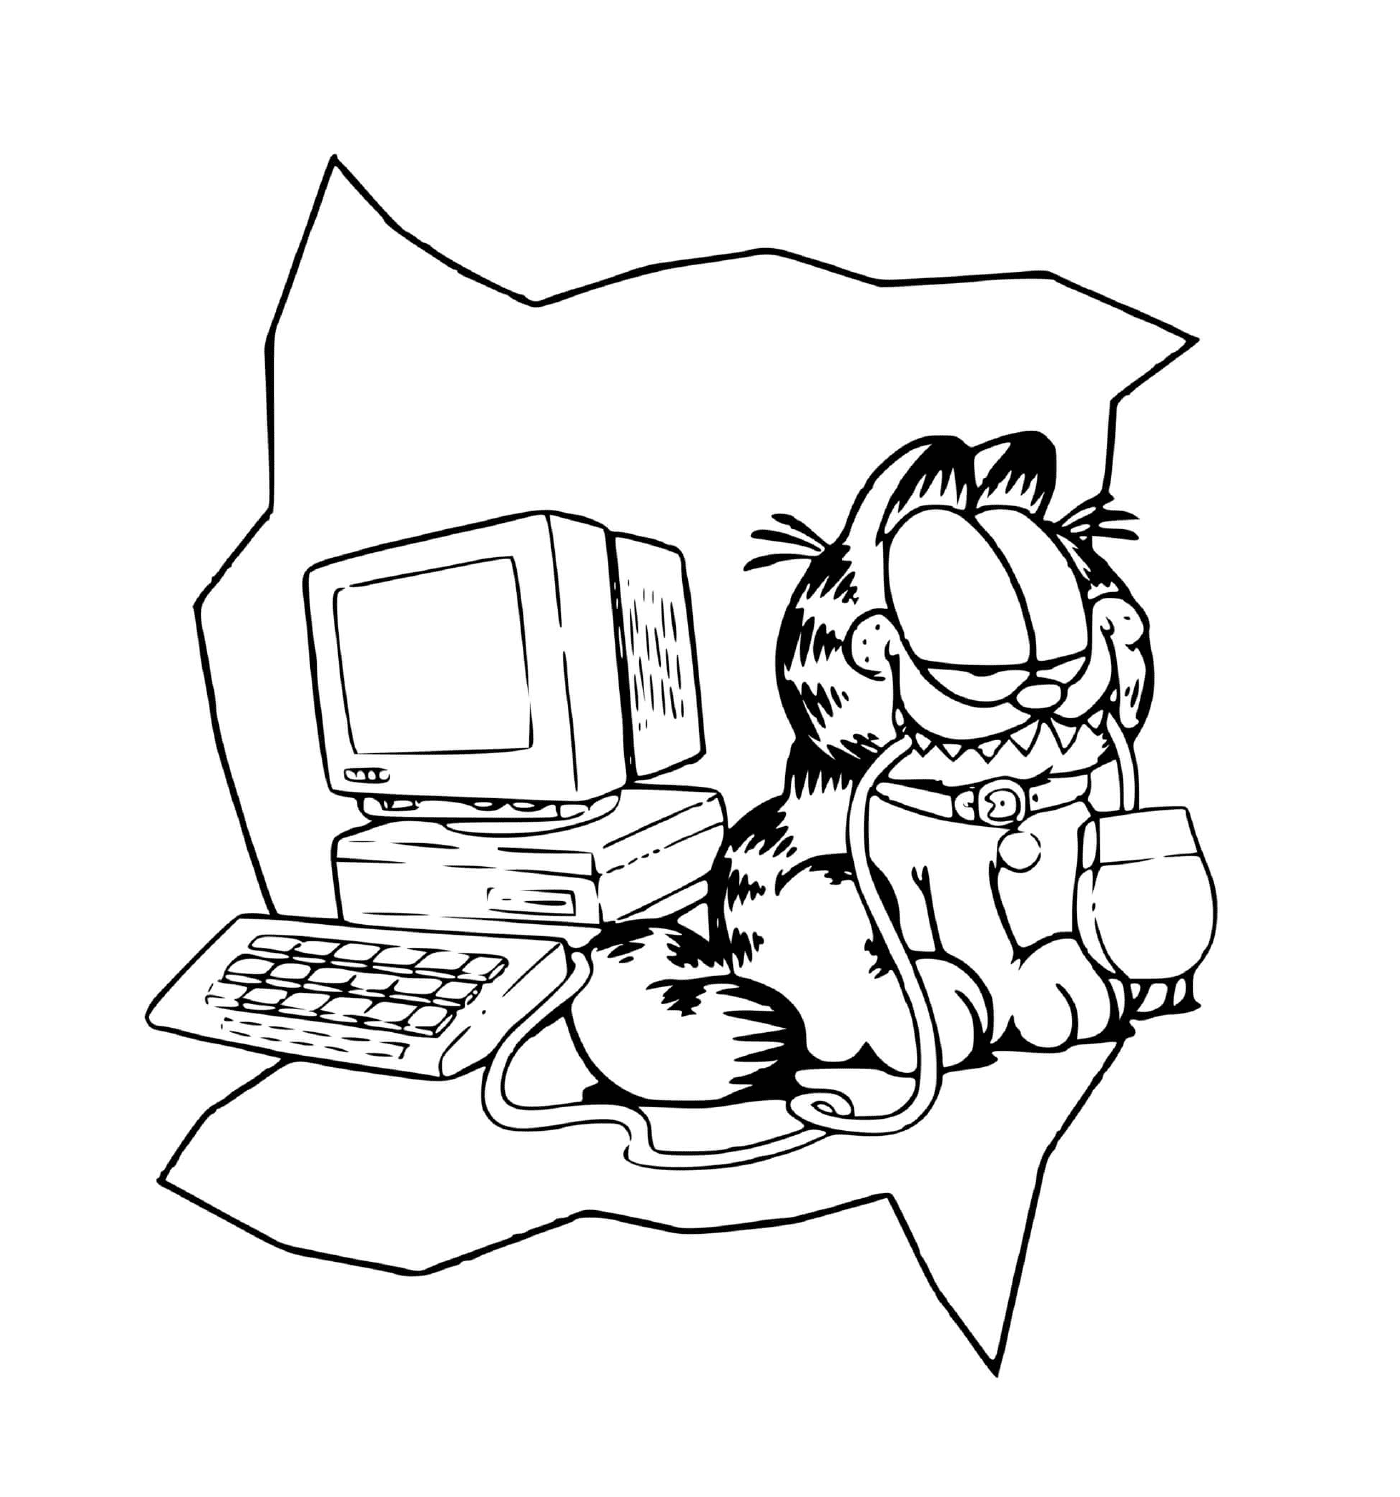  Garfield likes to play with a computer 